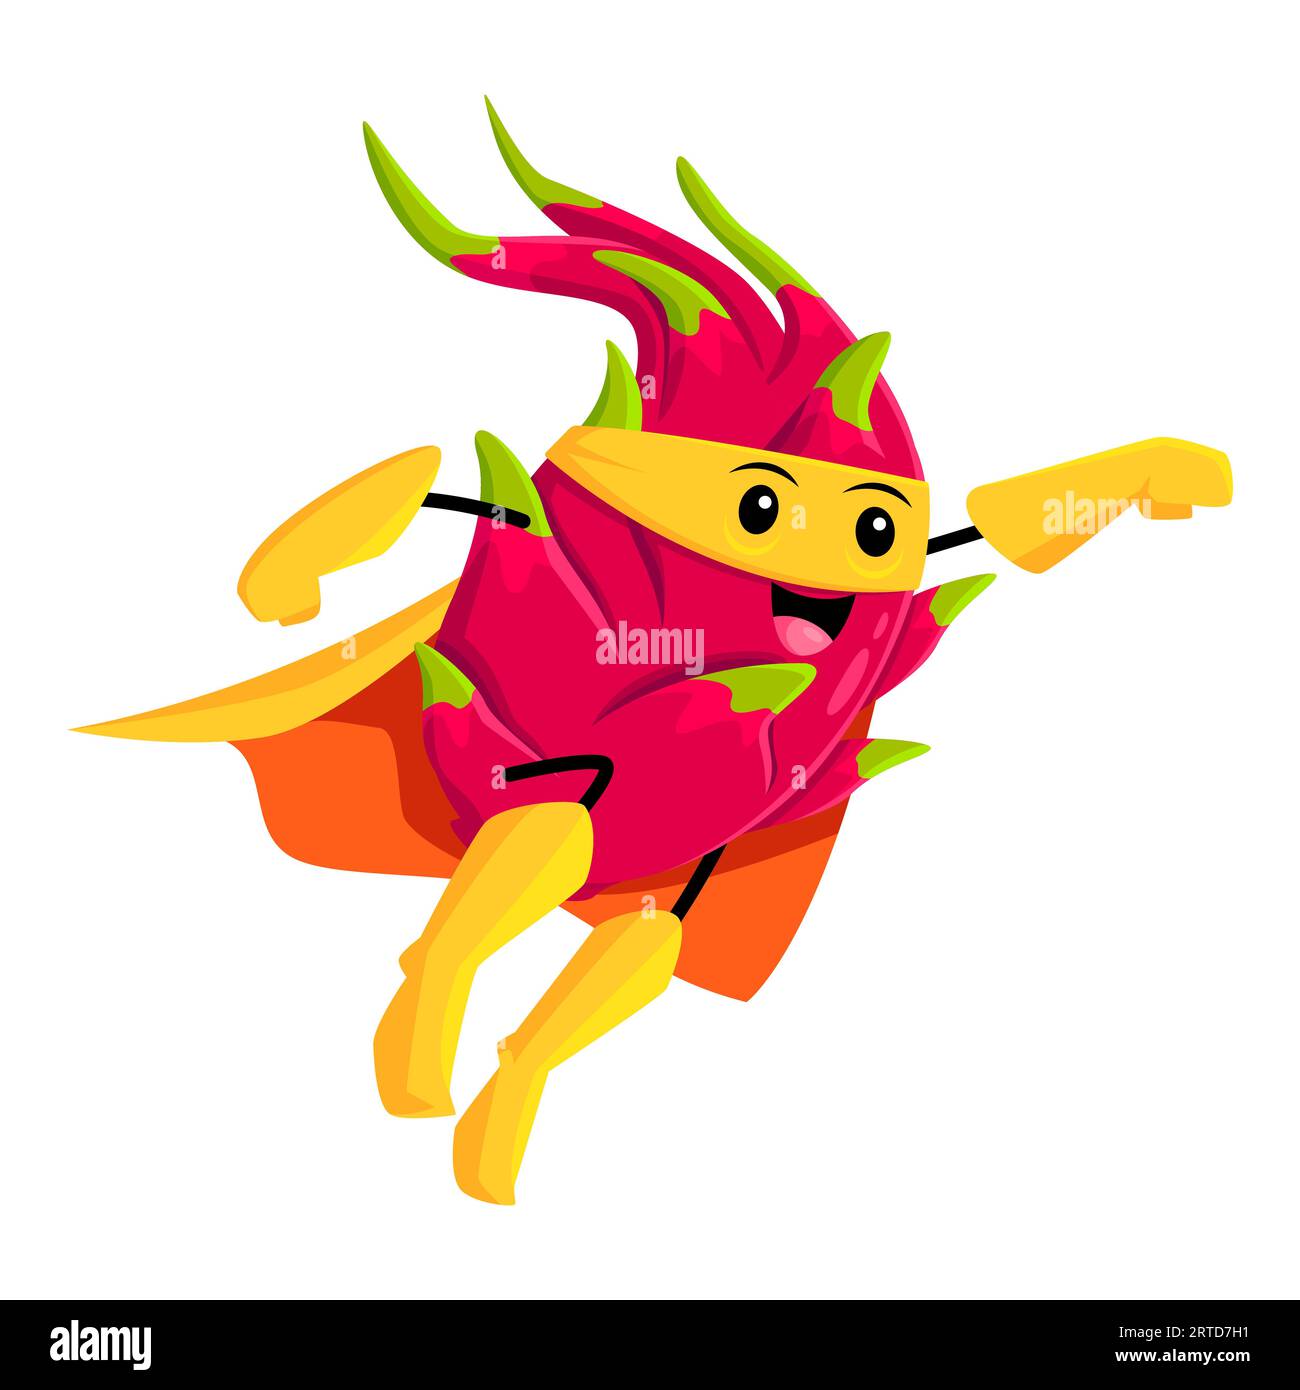 Cartoon dragon fruit superhero defender character flying high with powerful punch. Smiling tropical pitahaya juicy fruit wear mask and cape soaring th Stock Vector